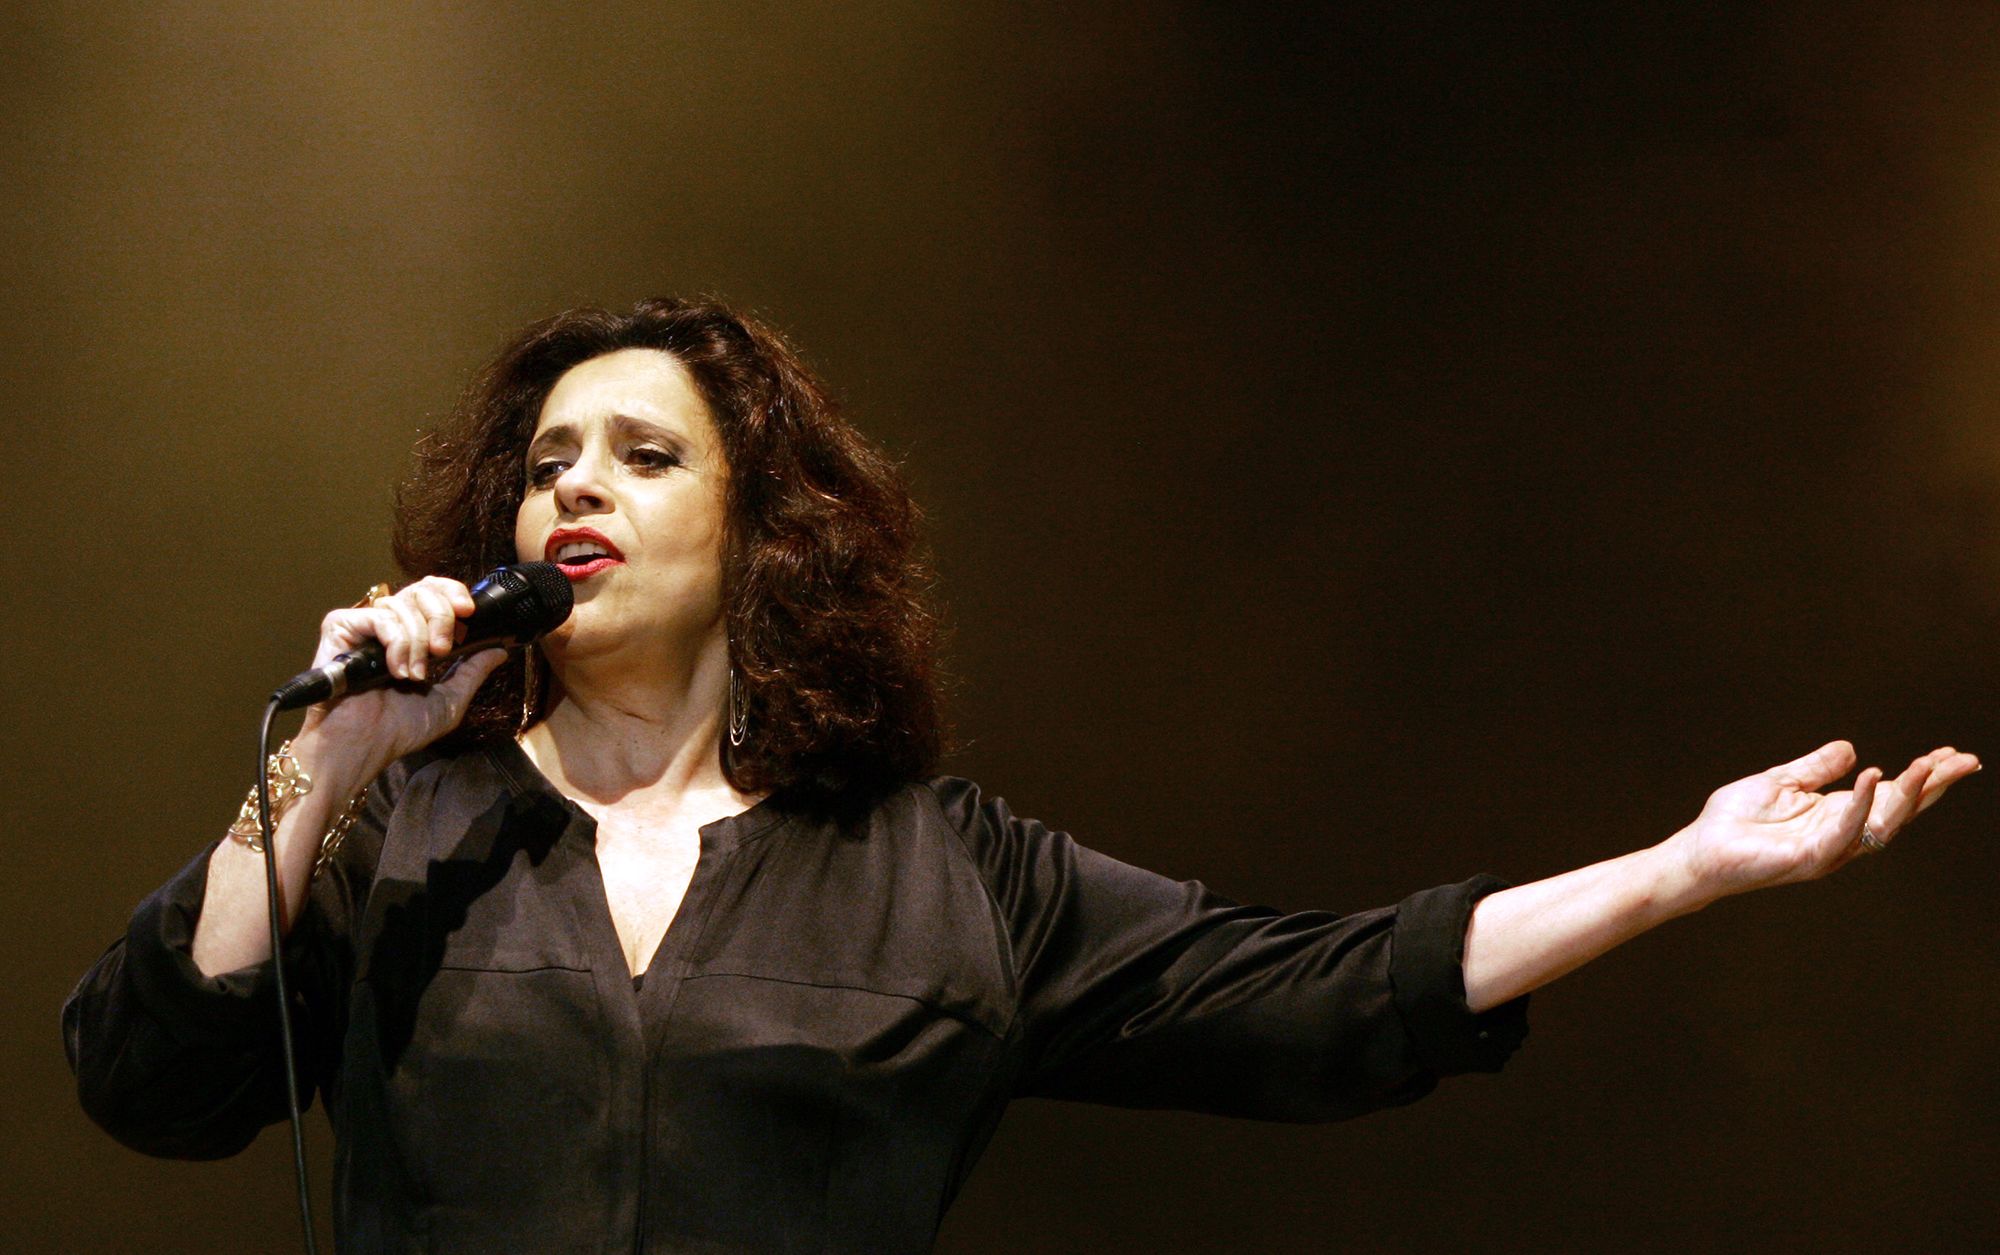 Gal Costa Biography, Wikipedia, Age, Family, Career, Cause of Death, and Net Worth